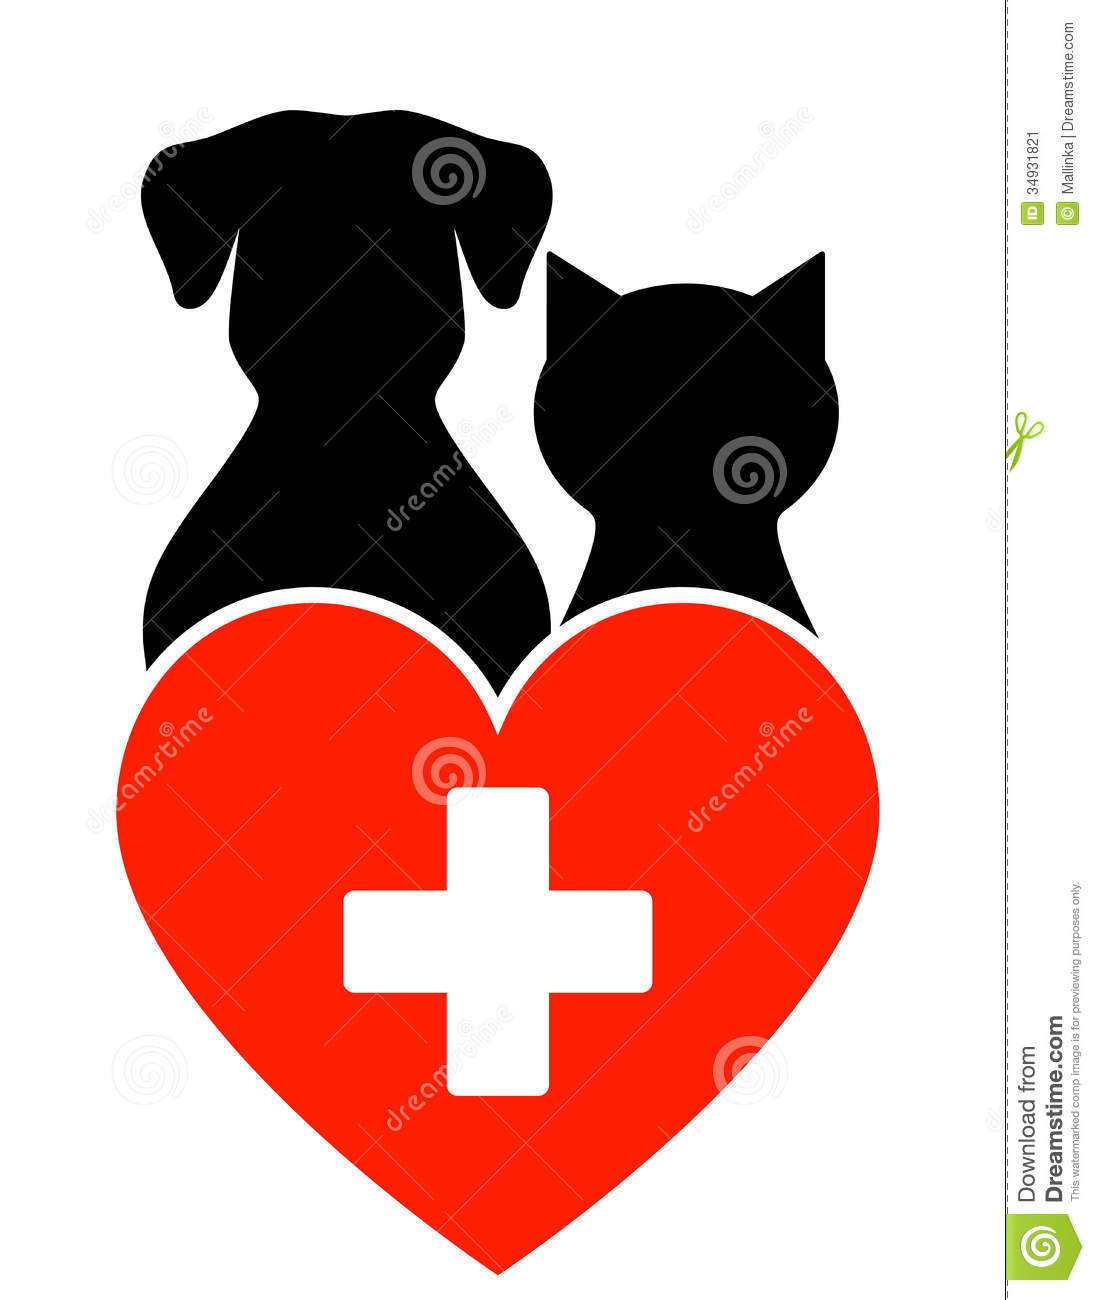 Veterinary Sign With Dog And Cat Stock Image   Image  34931821